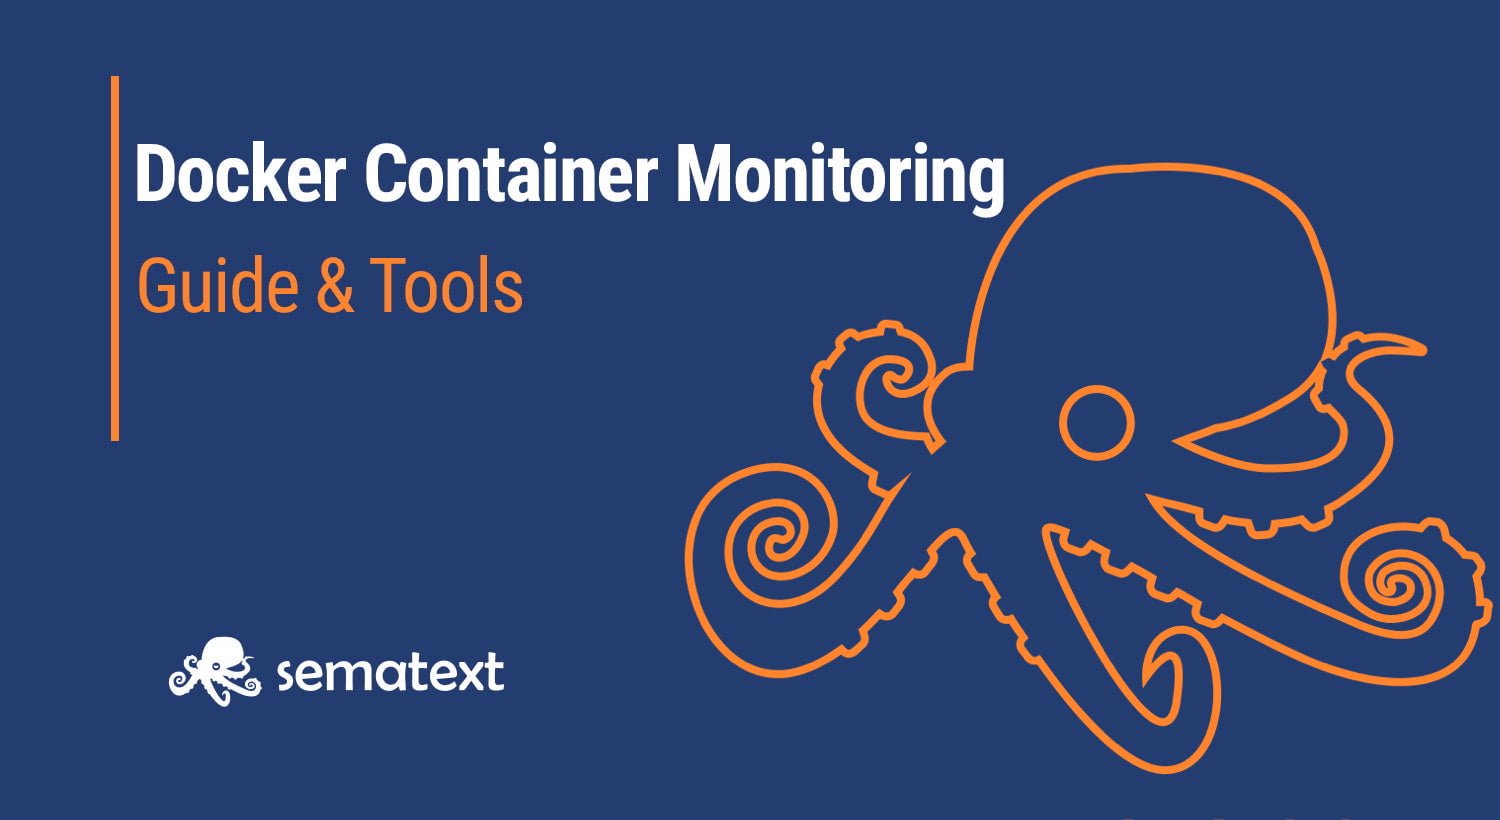 12 Best Docker Container Monitoring Tools: Pros & Cons Comparison [2022]